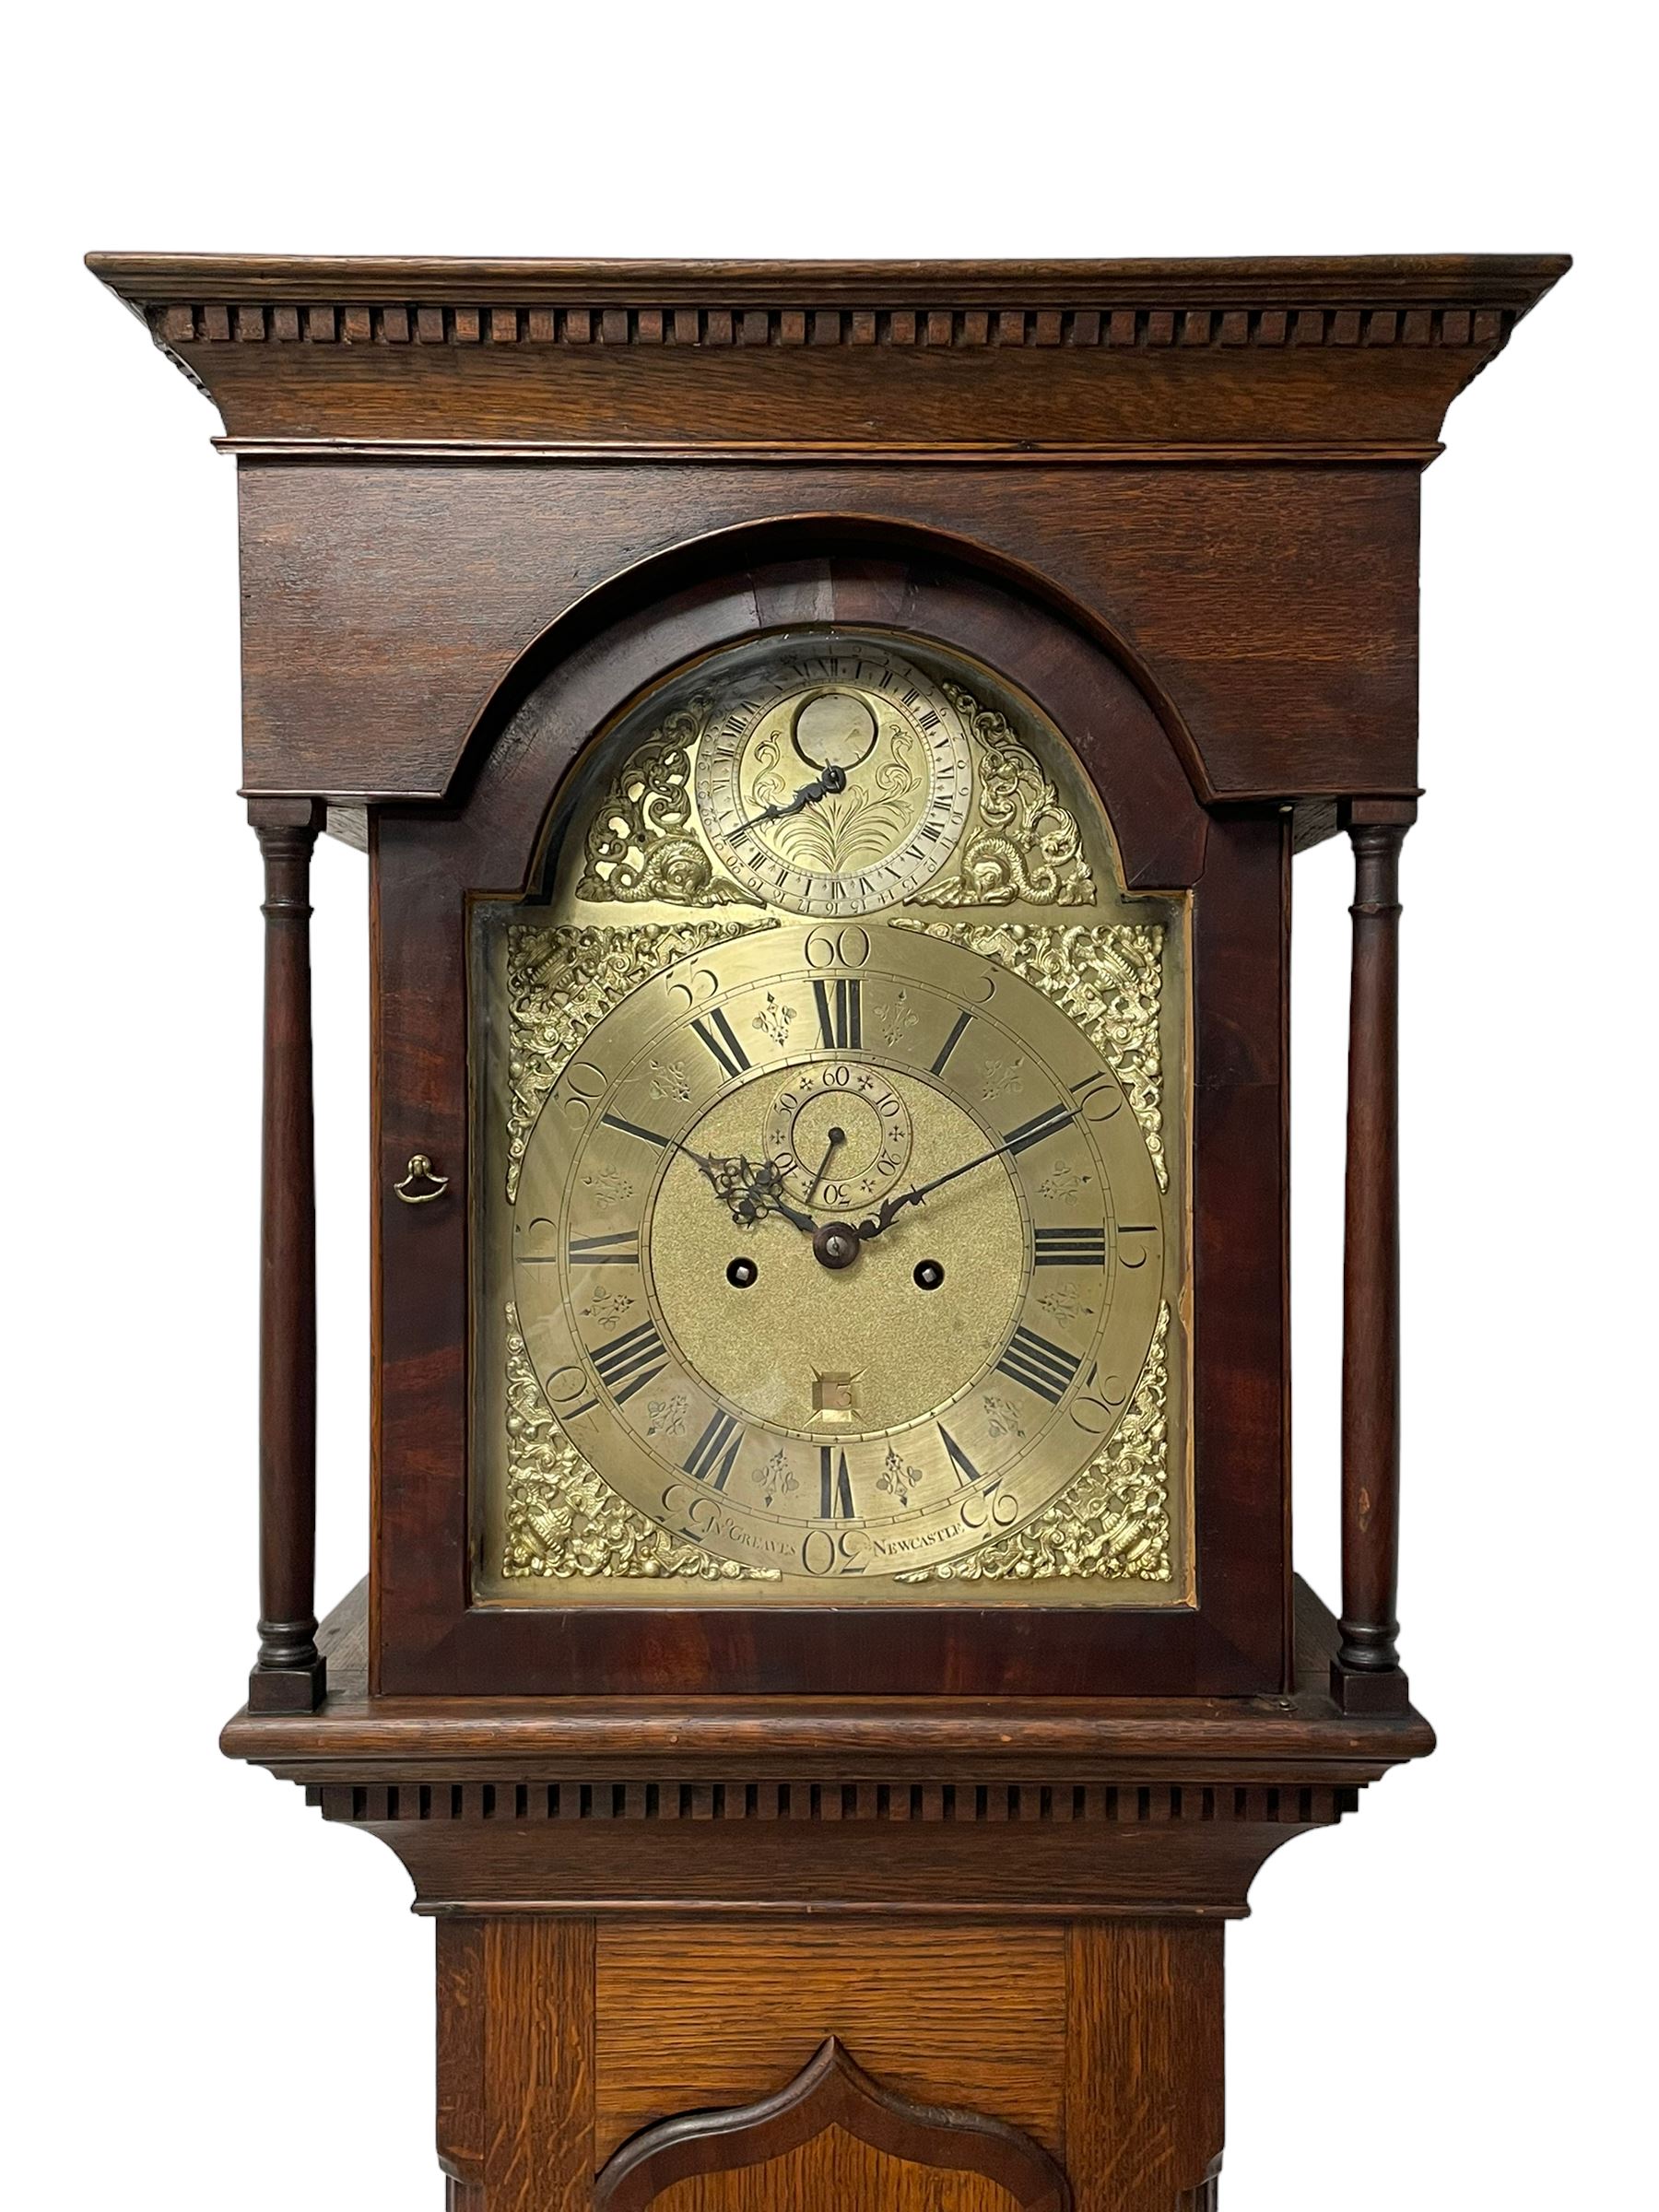 John Greaves of Newcastle - Mid-18th century 8-day oak longcase clock with a flat top - Image 2 of 12